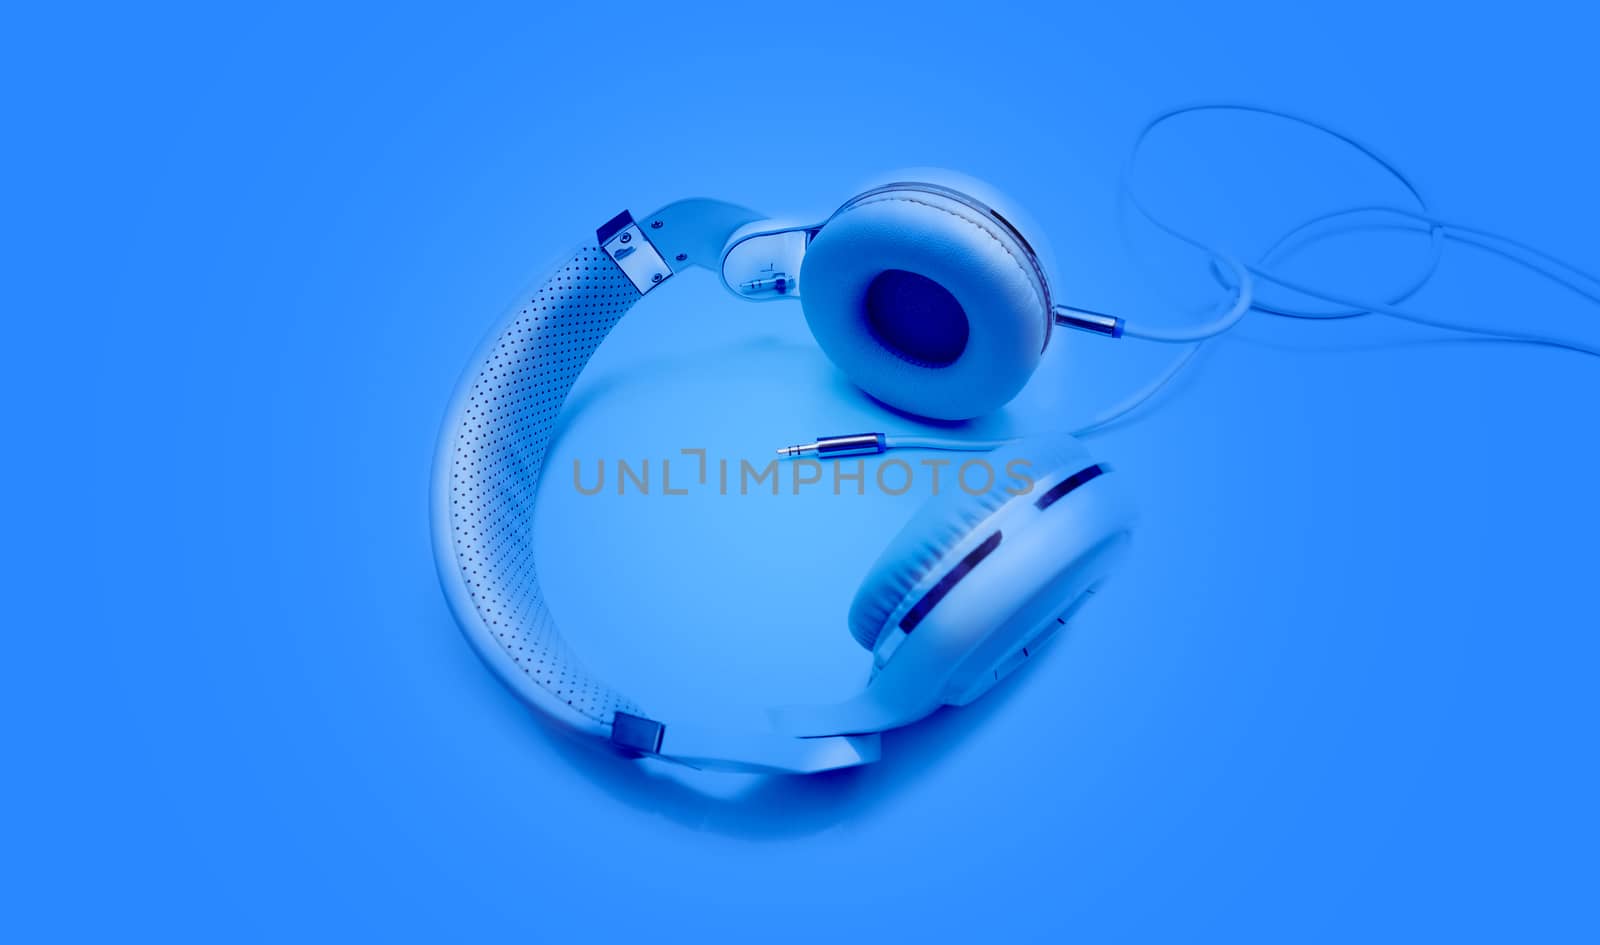 Top view blue headphones and Convention Aux cable 3.5 mm with copy space. Isolated on blue background